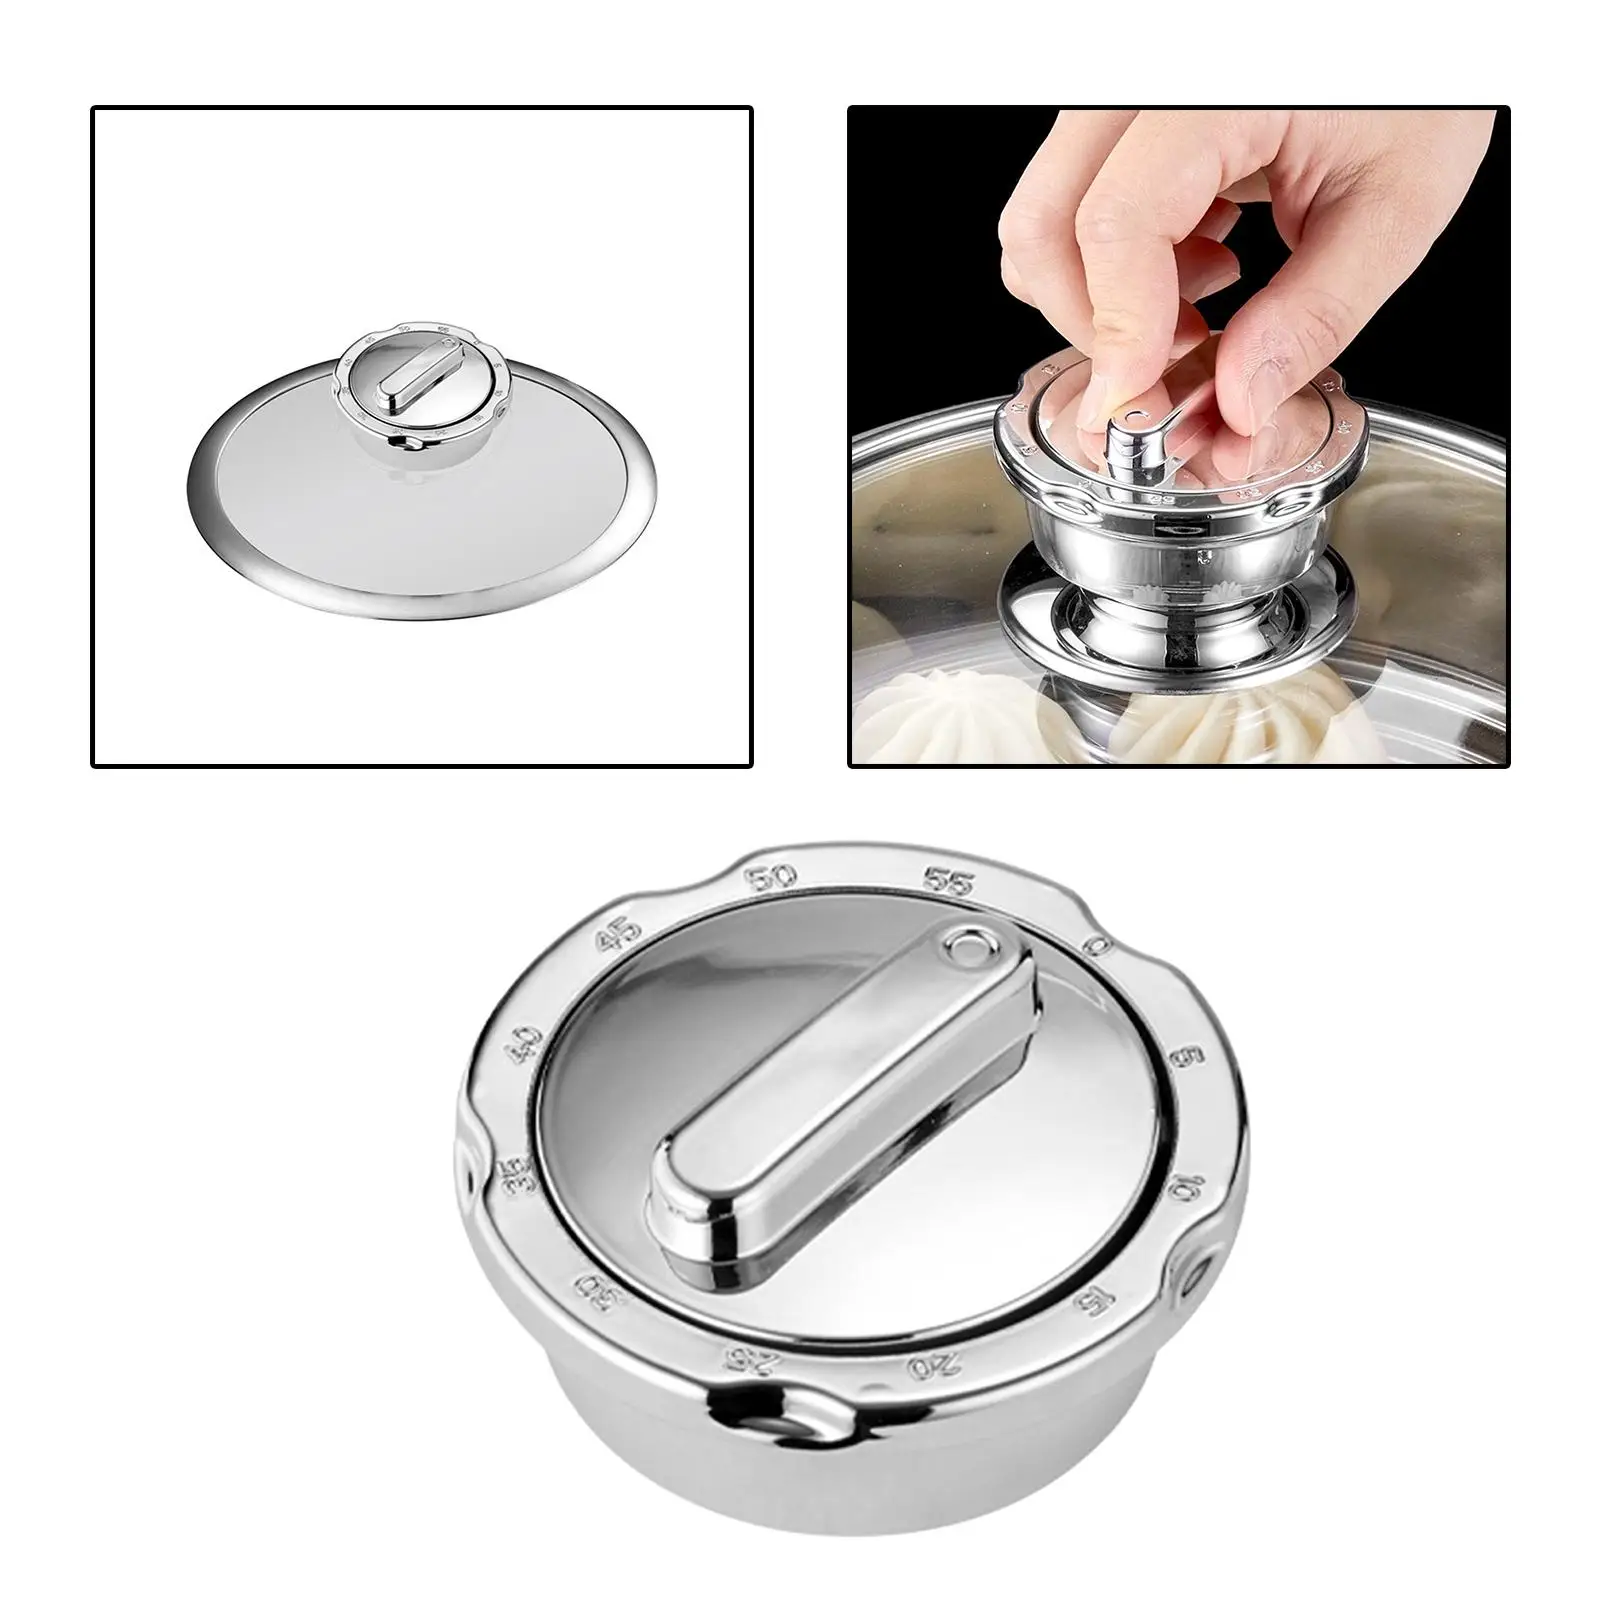 Kitchen Pot Lid Timer Loud Alarm Time Management Cooking Utensils Accessories Easy to Install Stainless Steel Cooking Timer